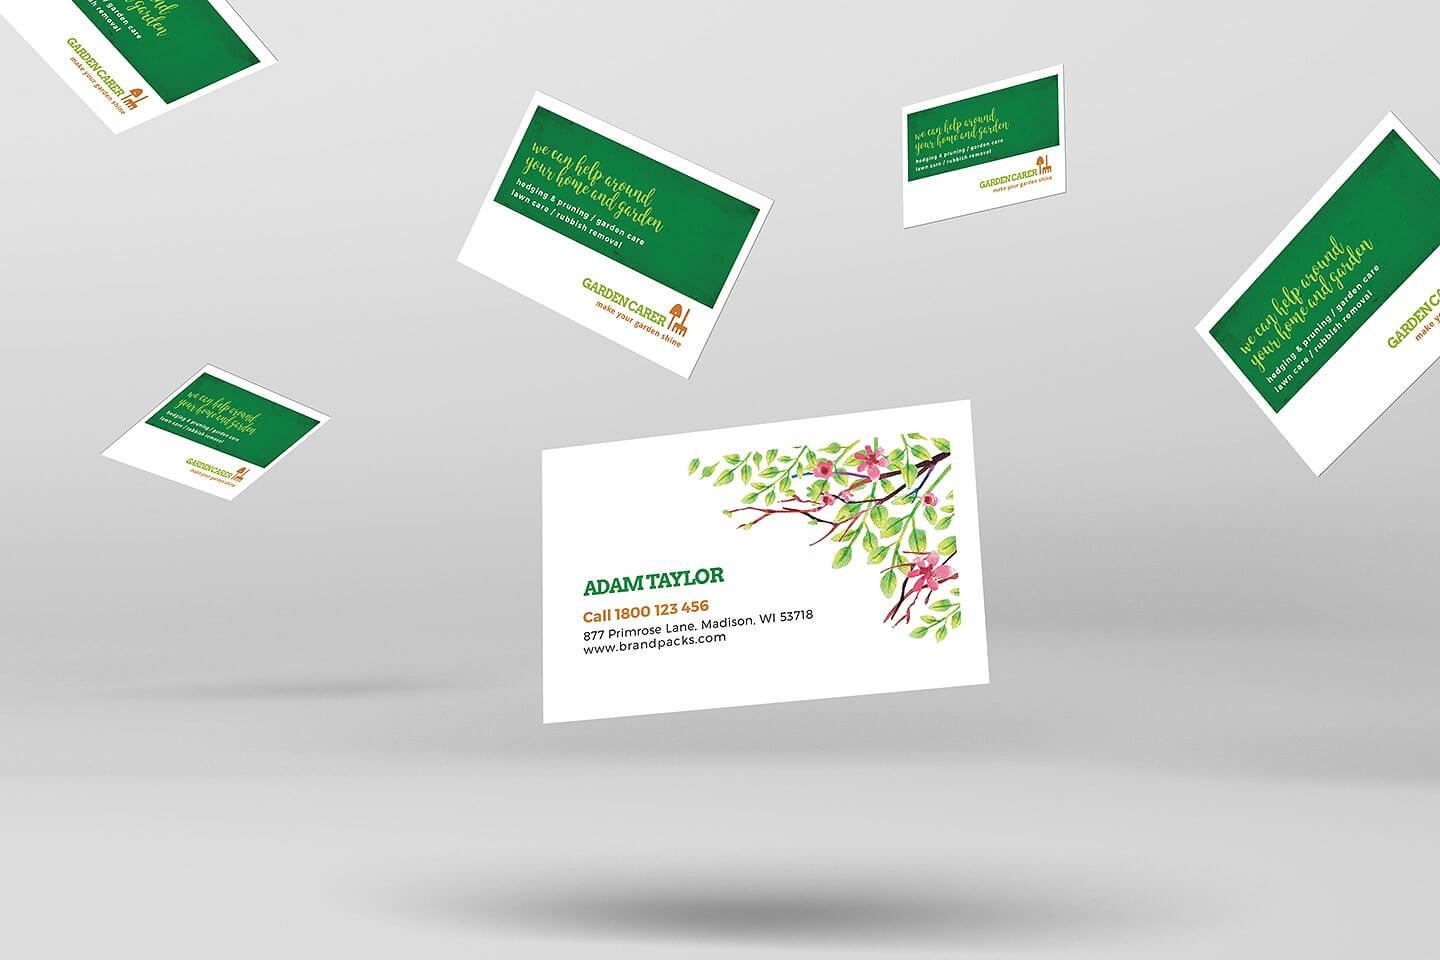 12+ Business Card Designs For Landscapers | Design Trends Within Gardening Business Cards Templates